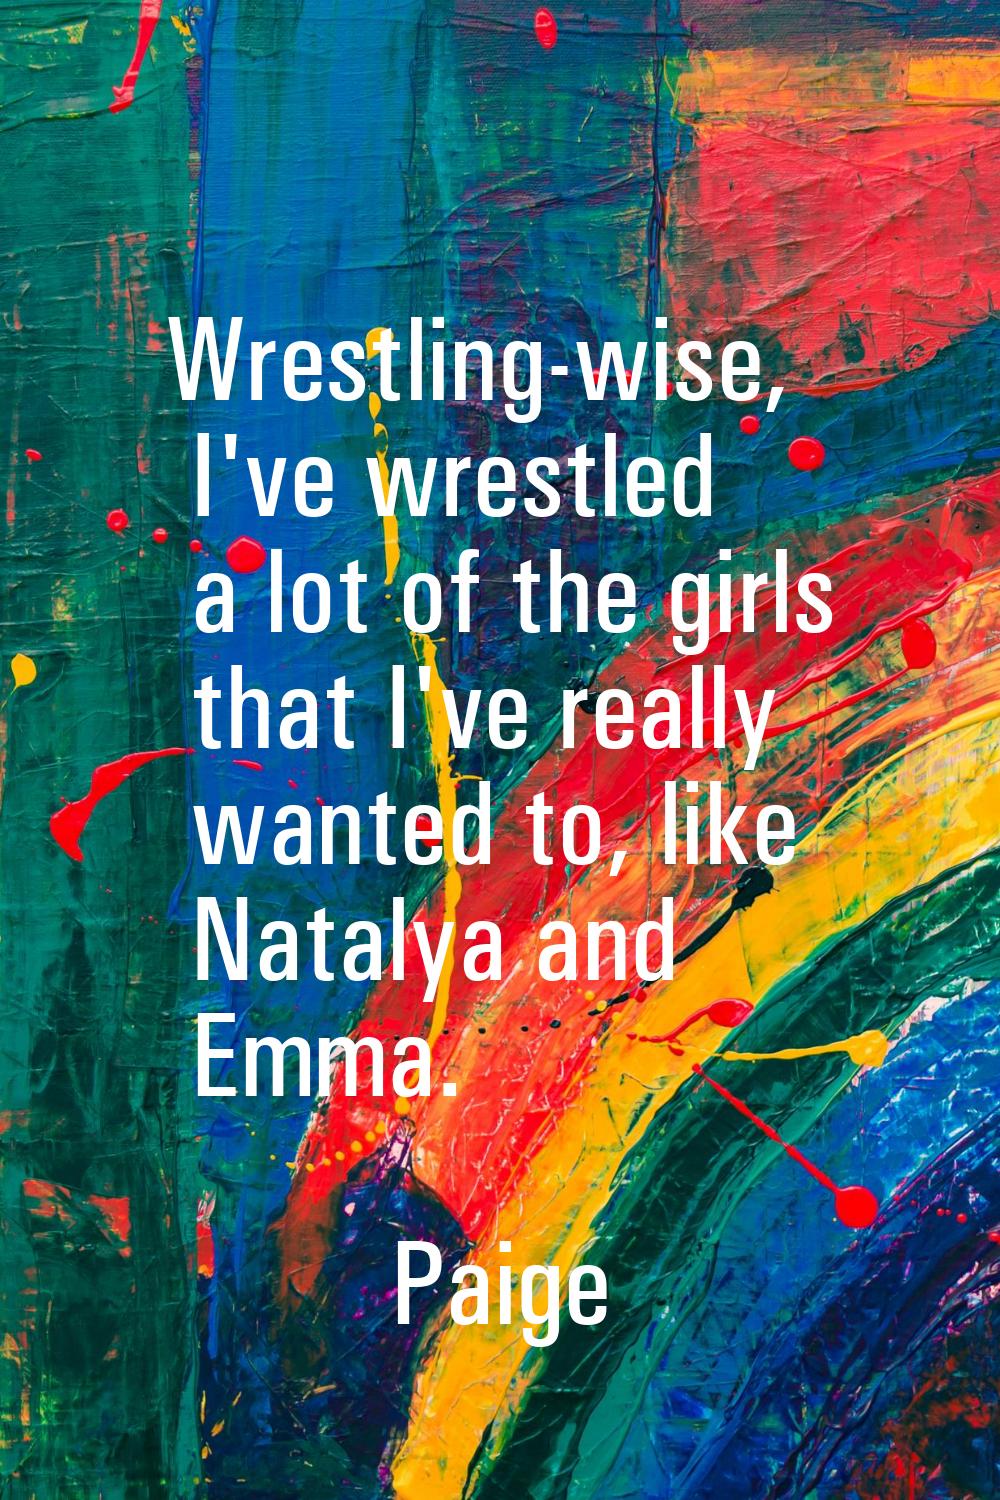 Wrestling-wise, I've wrestled a lot of the girls that I've really wanted to, like Natalya and Emma.